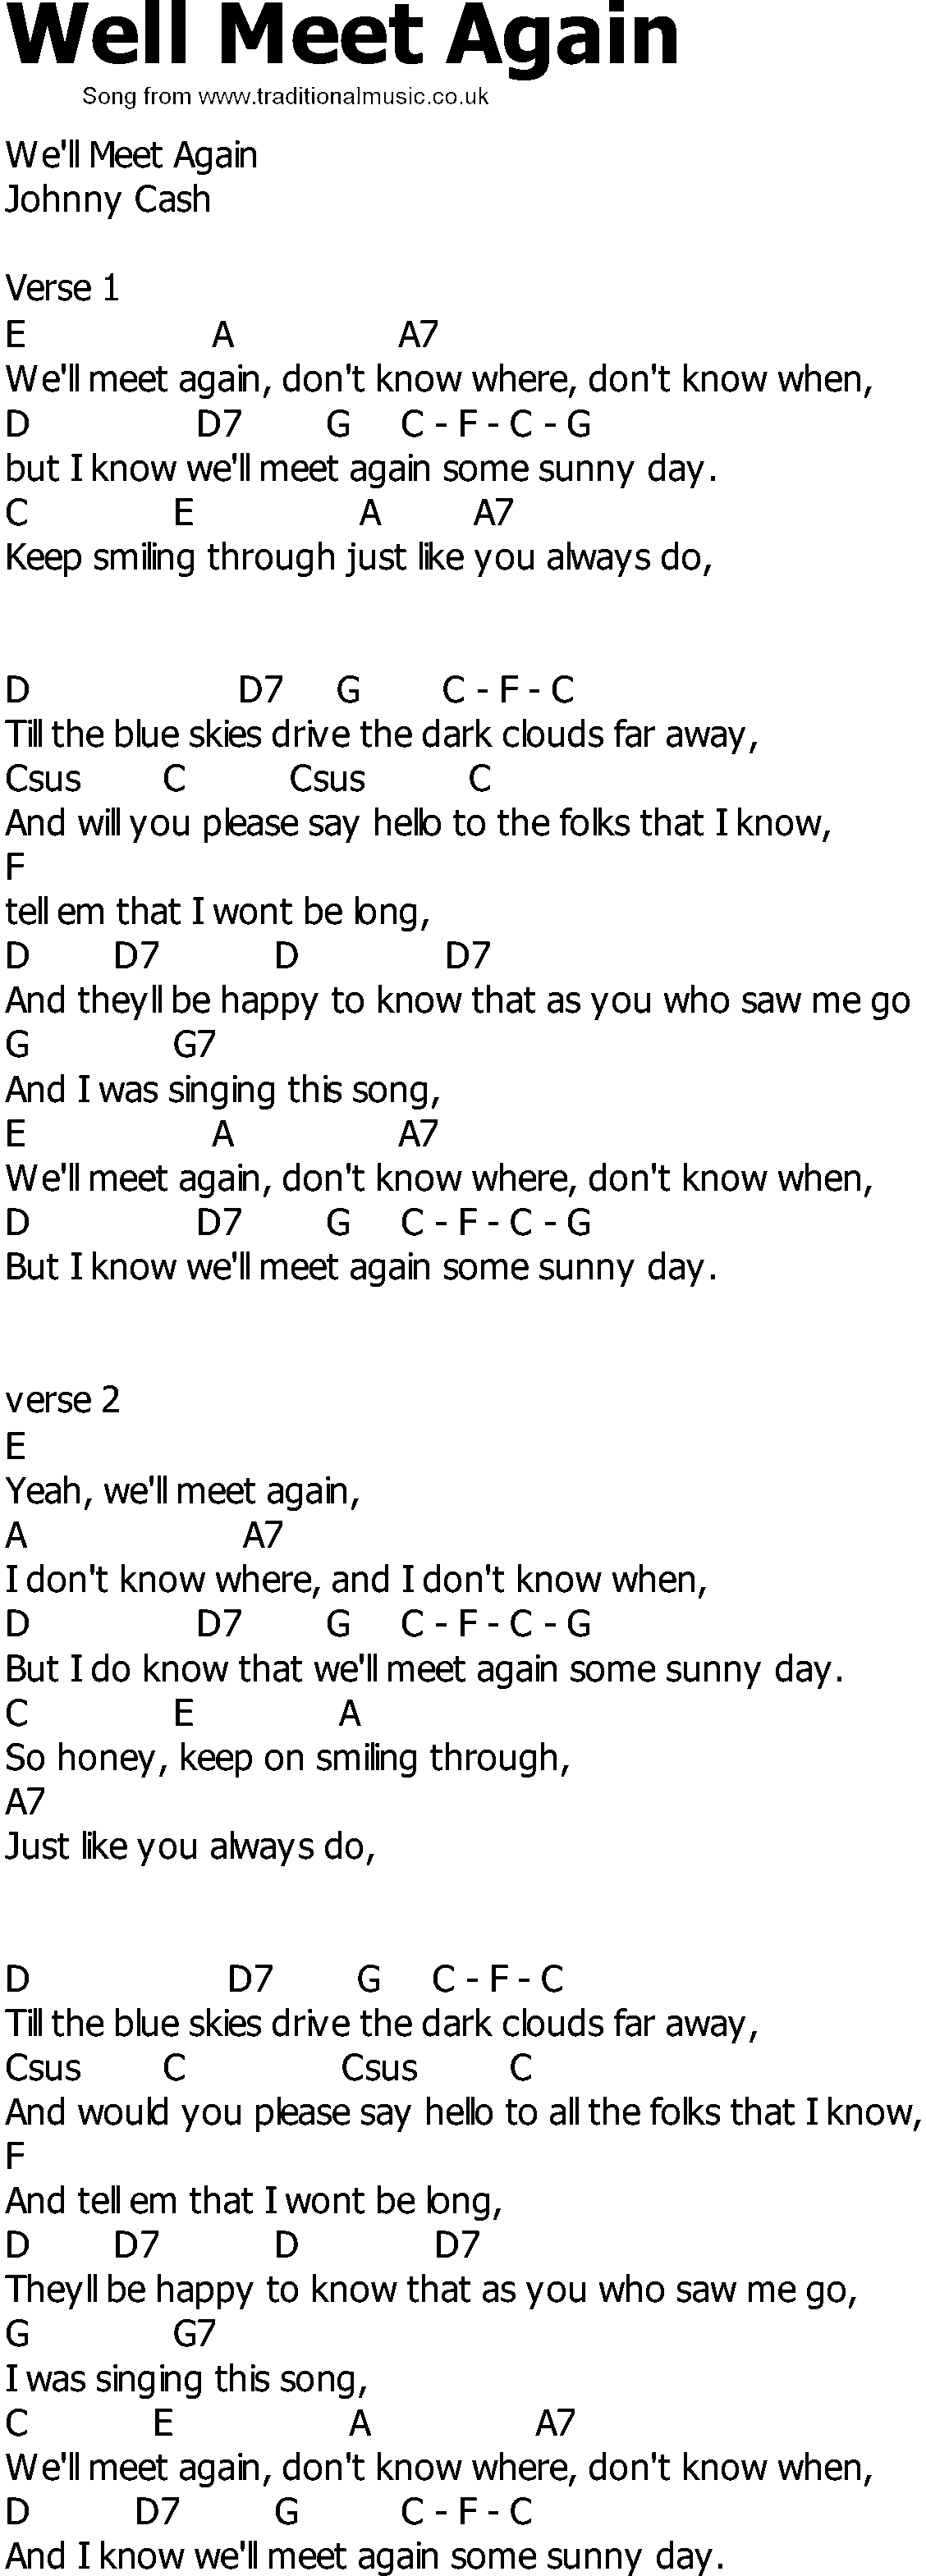 Old Country song lyrics with chords - Well Meet Again